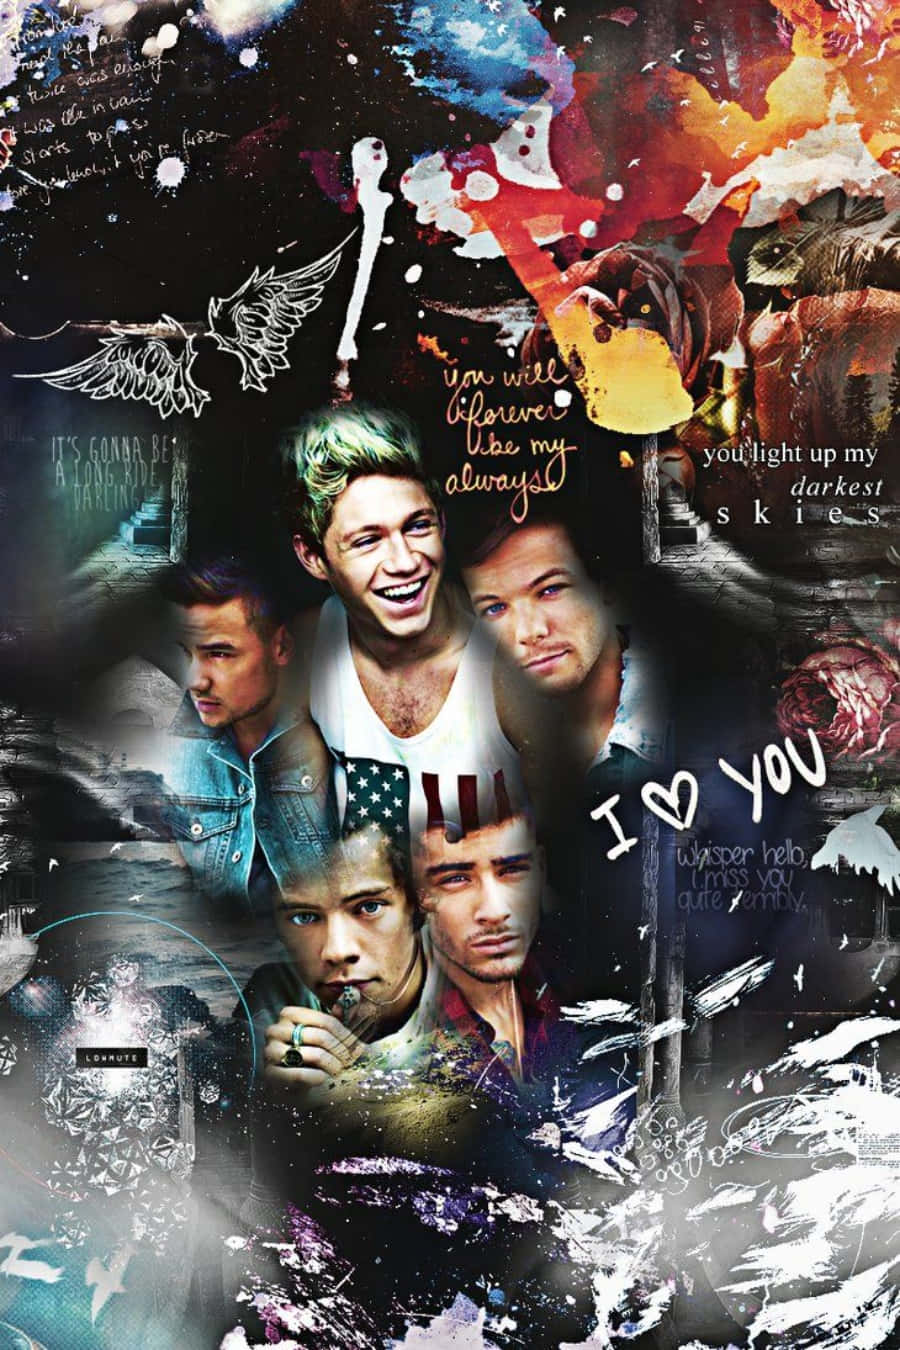 Download 1 Direction Iphone Wallpaper 